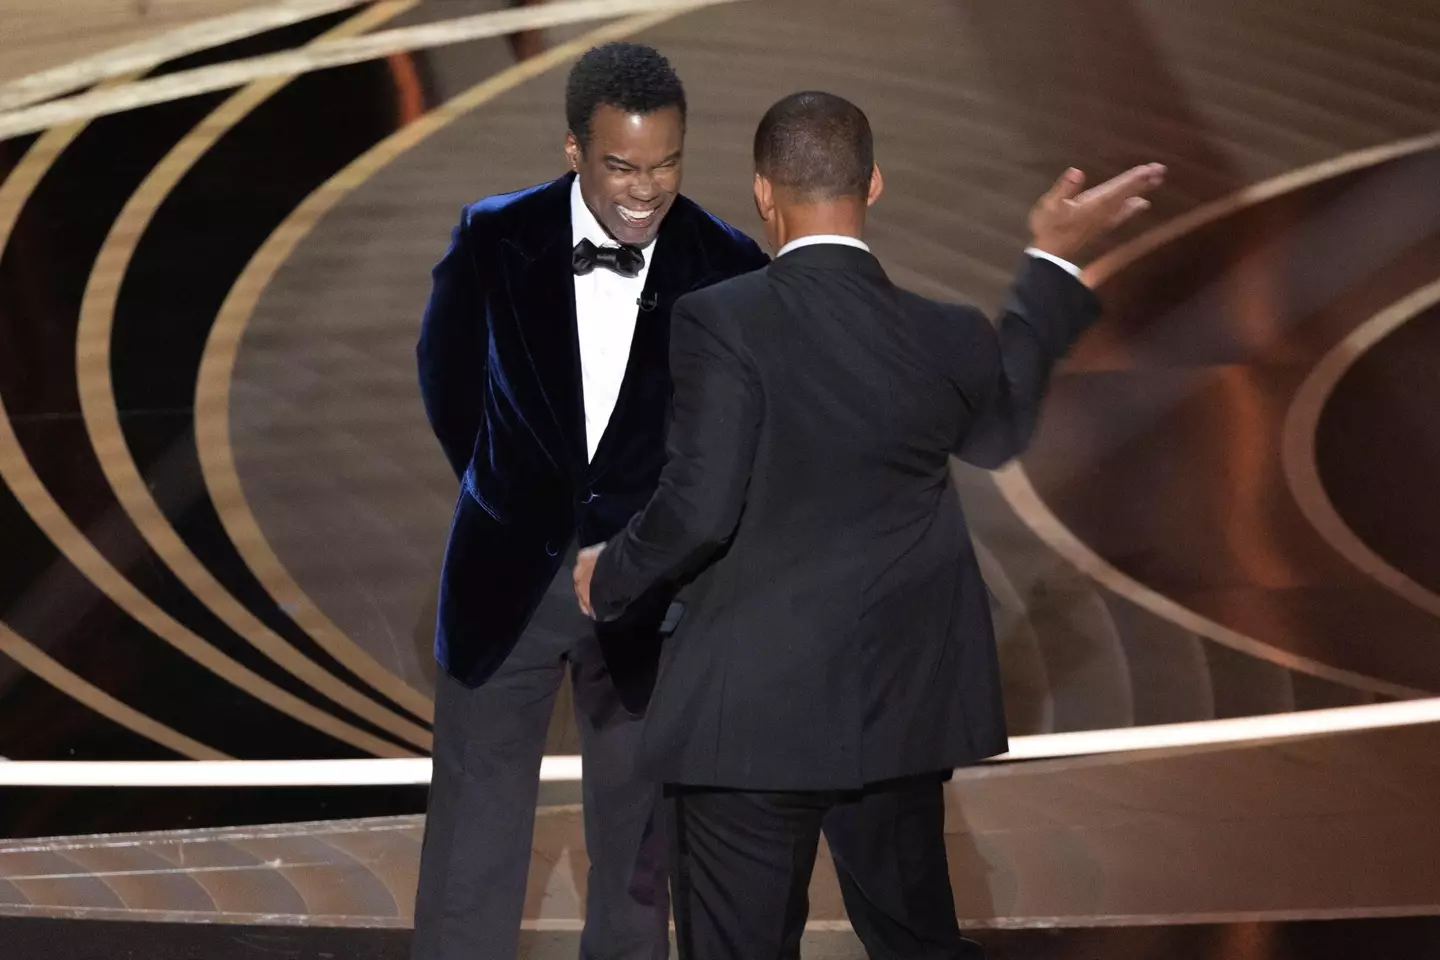 Chris Rock about to take the slap from Smith.